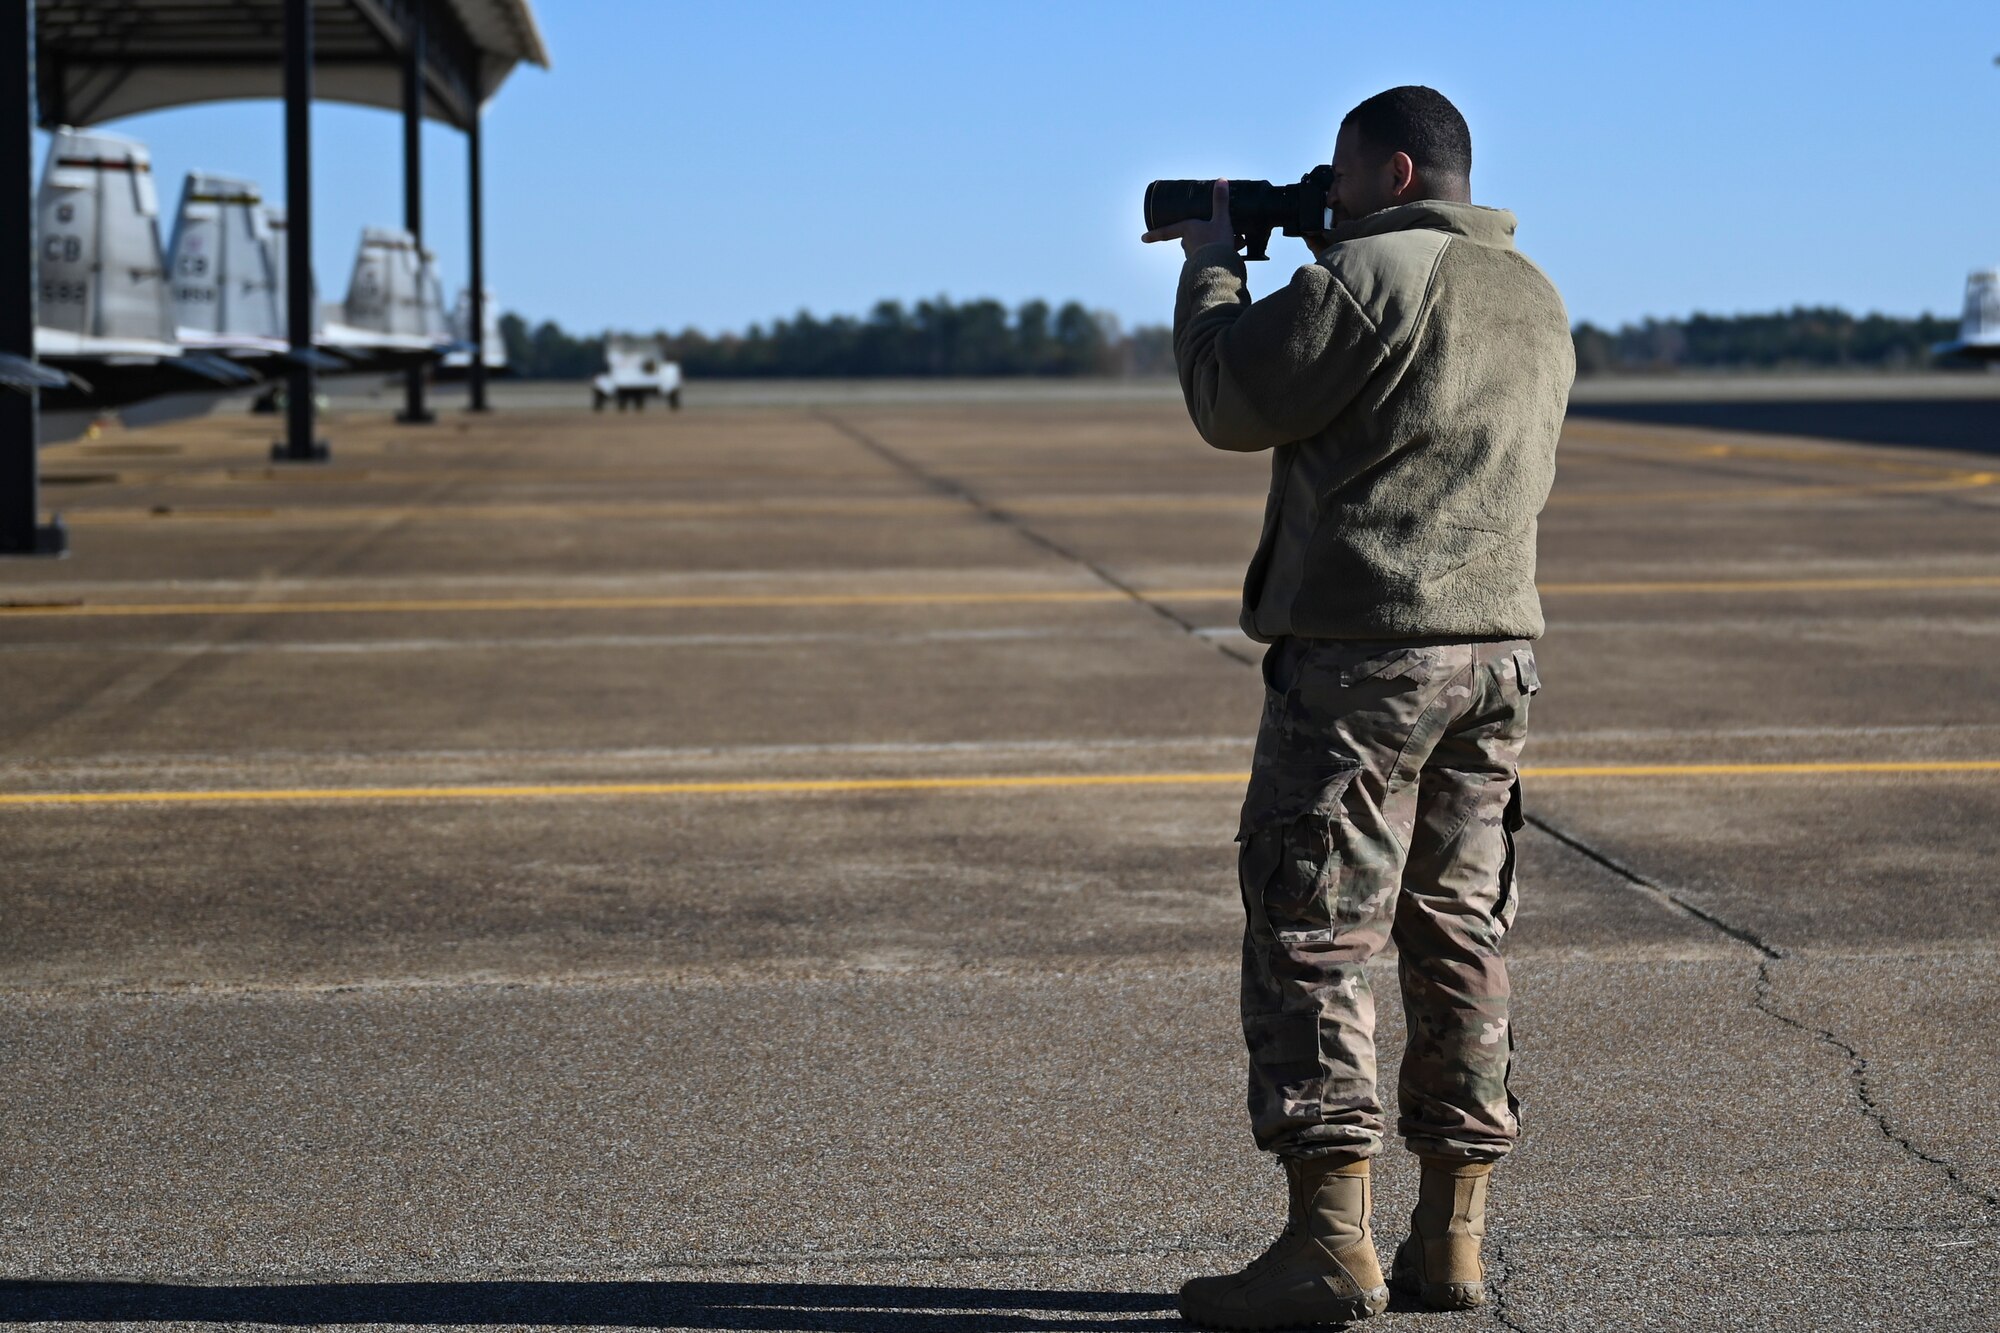 U.S. Air Force Senior Airman David Richardson, 14th Operations Support squadron aircrew flight equipment technician, practices photographing aircraft during a job swap with Public Affairs Nov. 11, 2020, on Columbus Air Force Base, Miss. Air Force Public Affairs advances Air Force priorities and achieves mission objectives through integrated planning, execution, and assessment of communication capabilities. (U.S. Air Force photo by Airman 1st Class Jessica Williams)